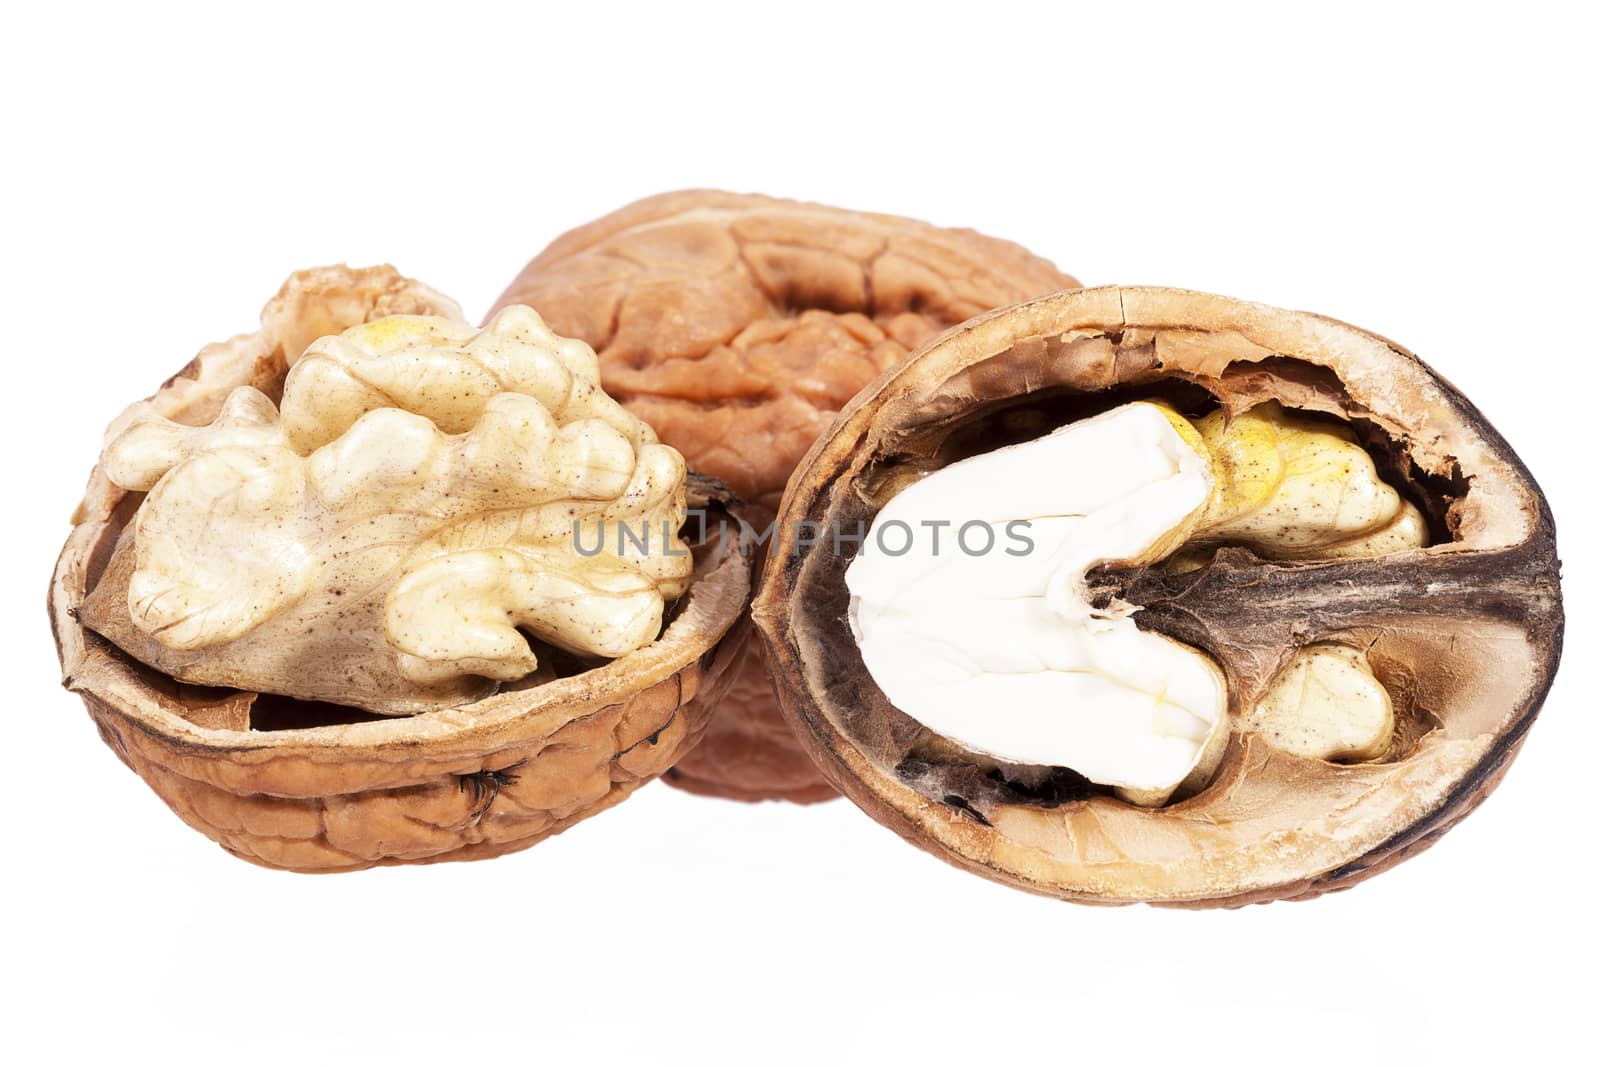 some walnuts isolated on white background.